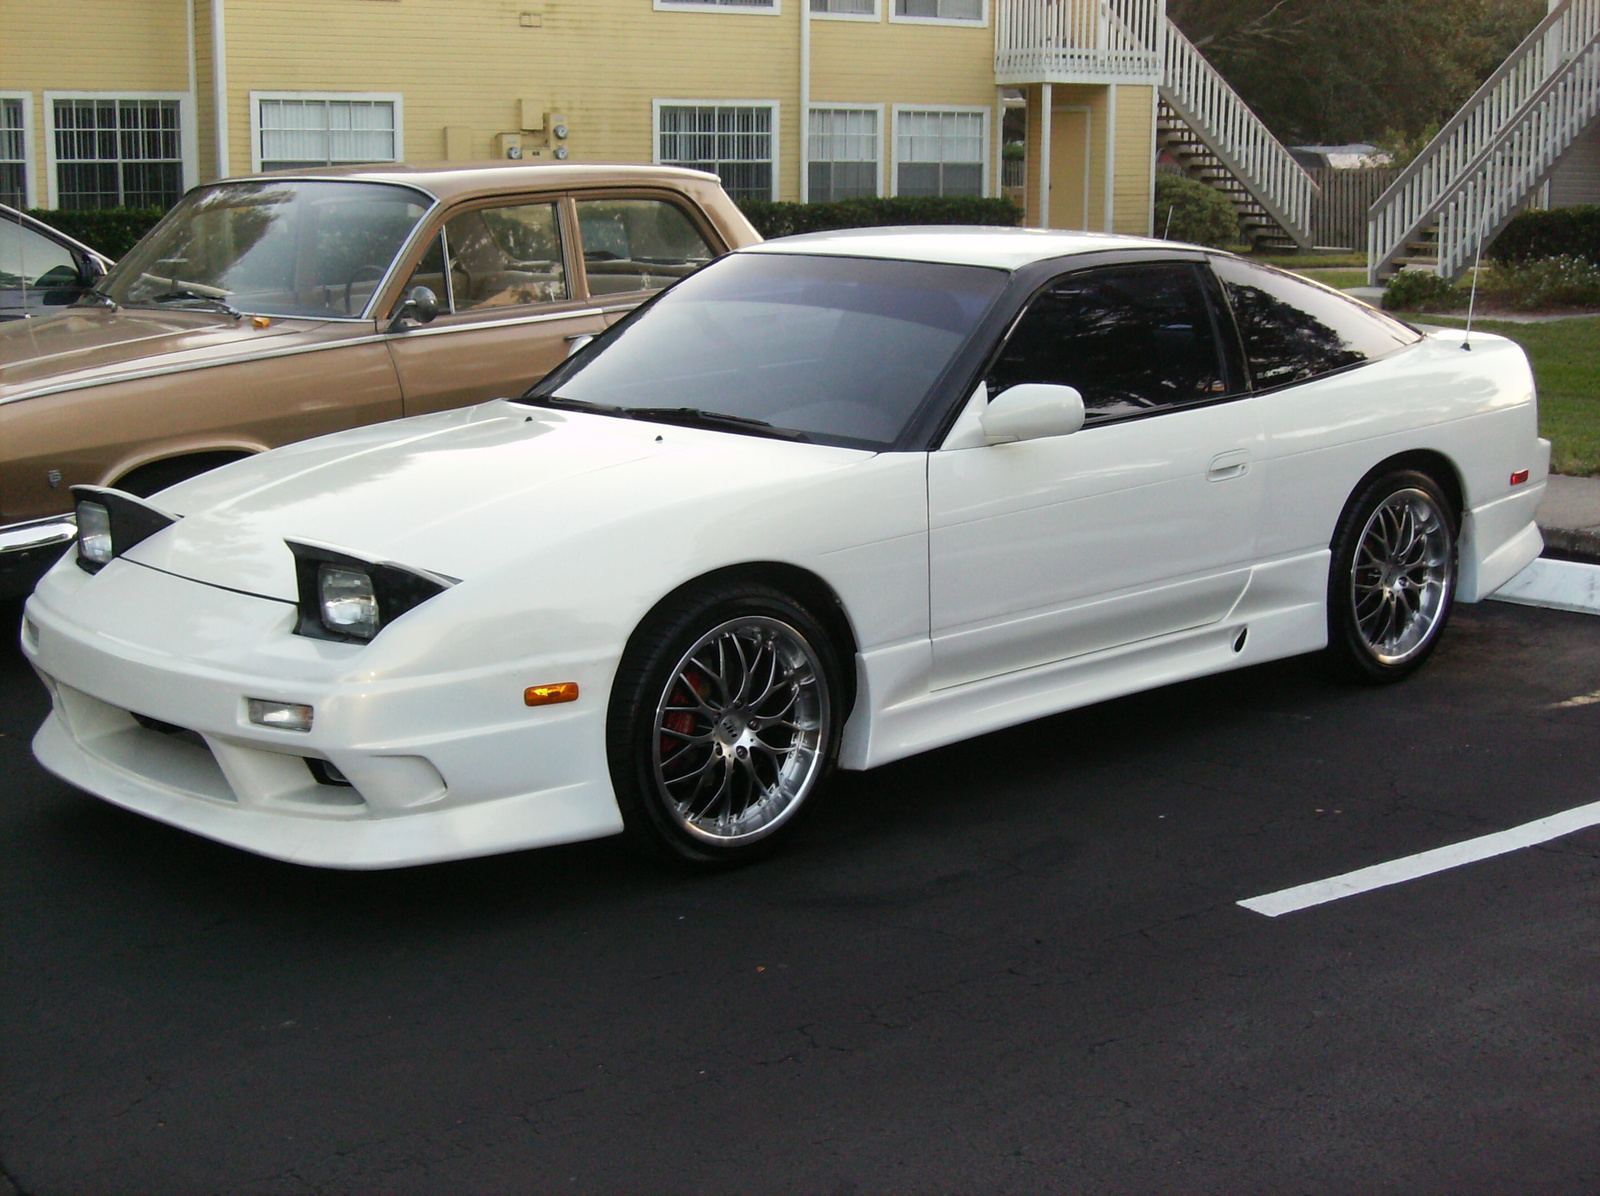 Picture of a 1992 nissan 240sx #3